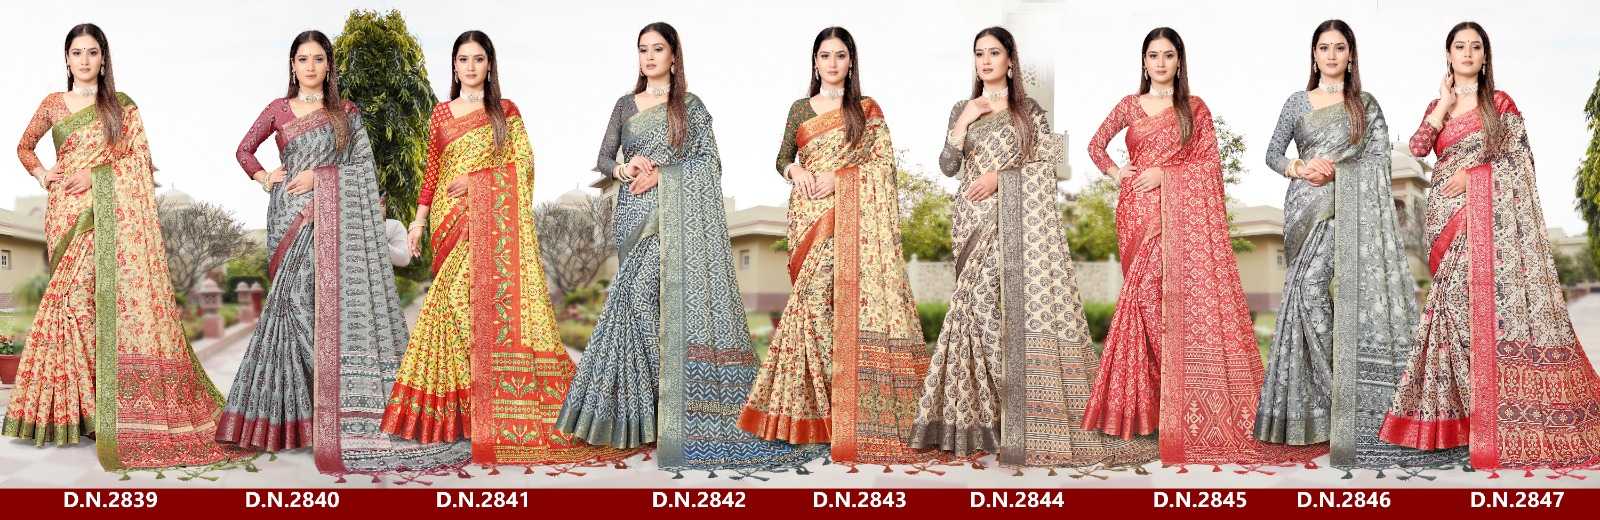 STYLEWELL BHUMIKA VOL 1 CASUAL WEAR DIGITAL PRINT SAREE WITH BLOUSE